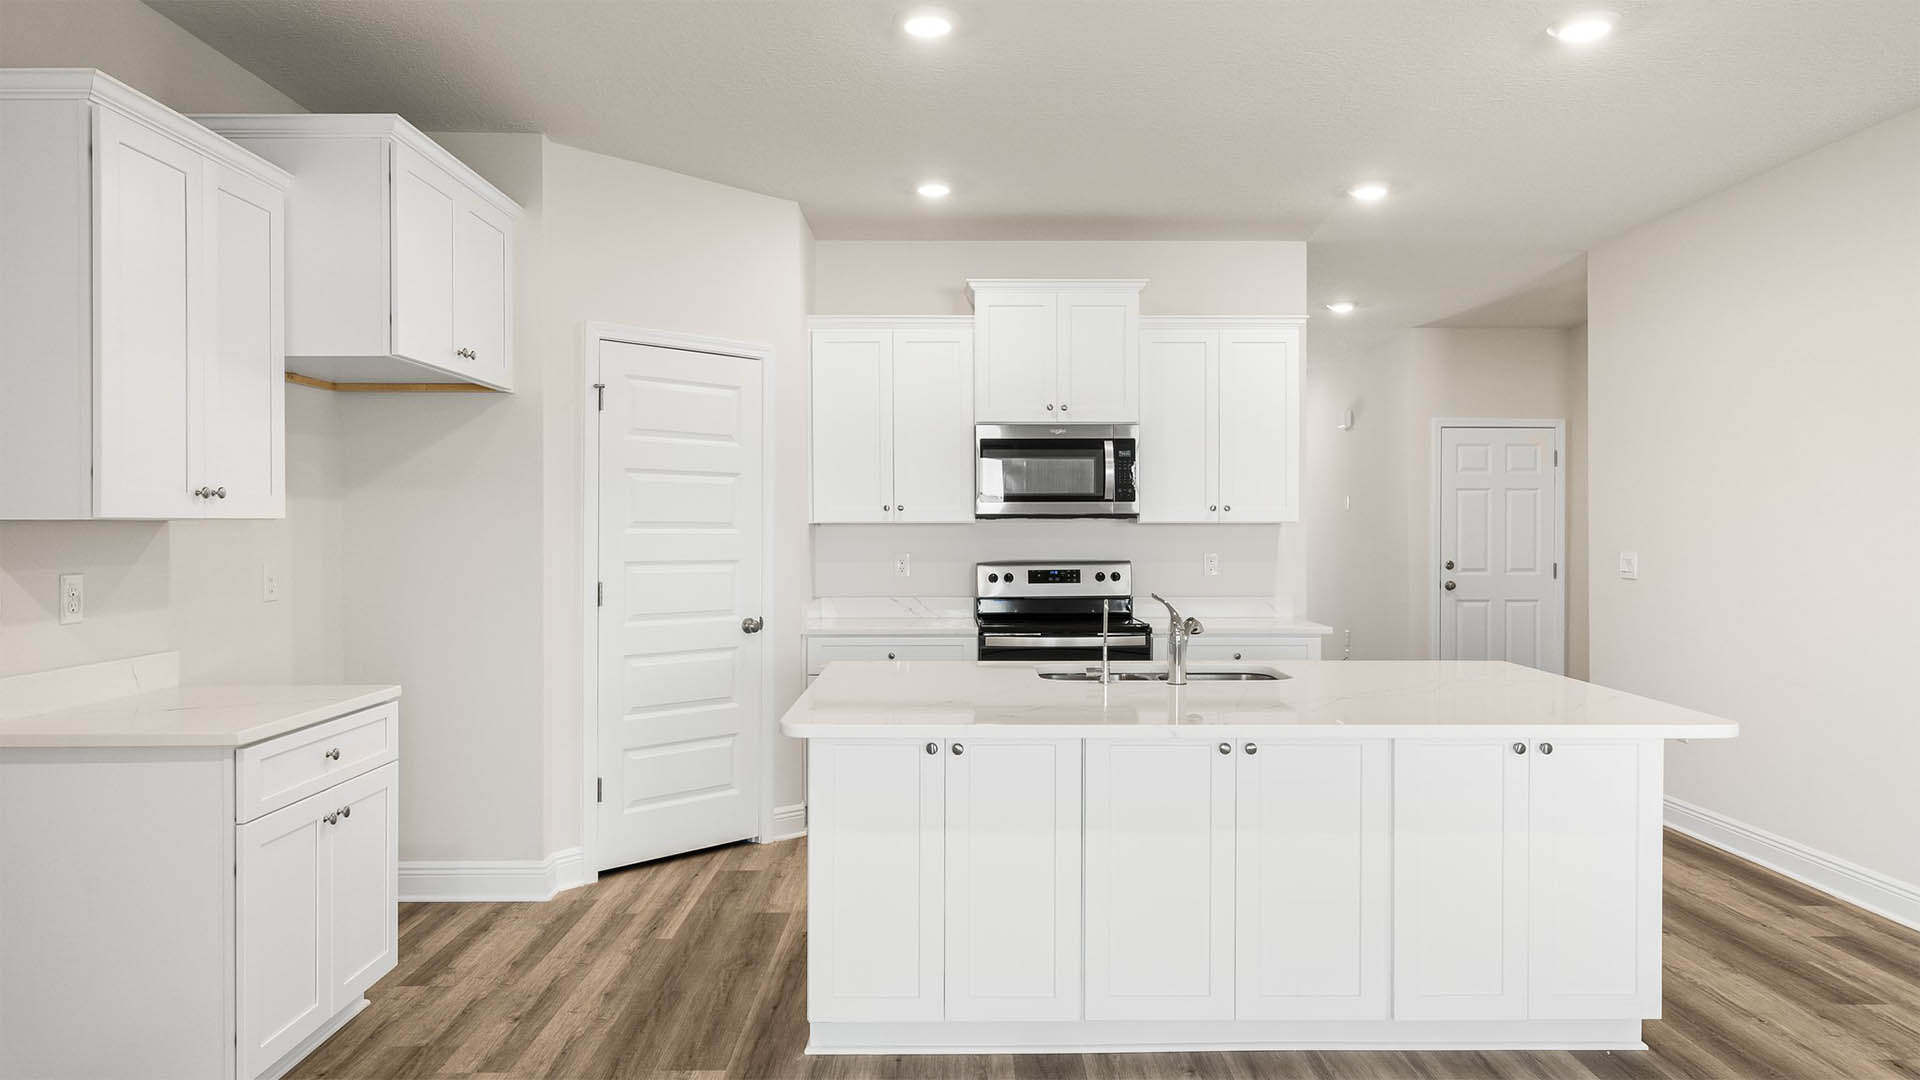 Kitchen with island and quartz countertops and white cabinets and stainless-steel appliances.